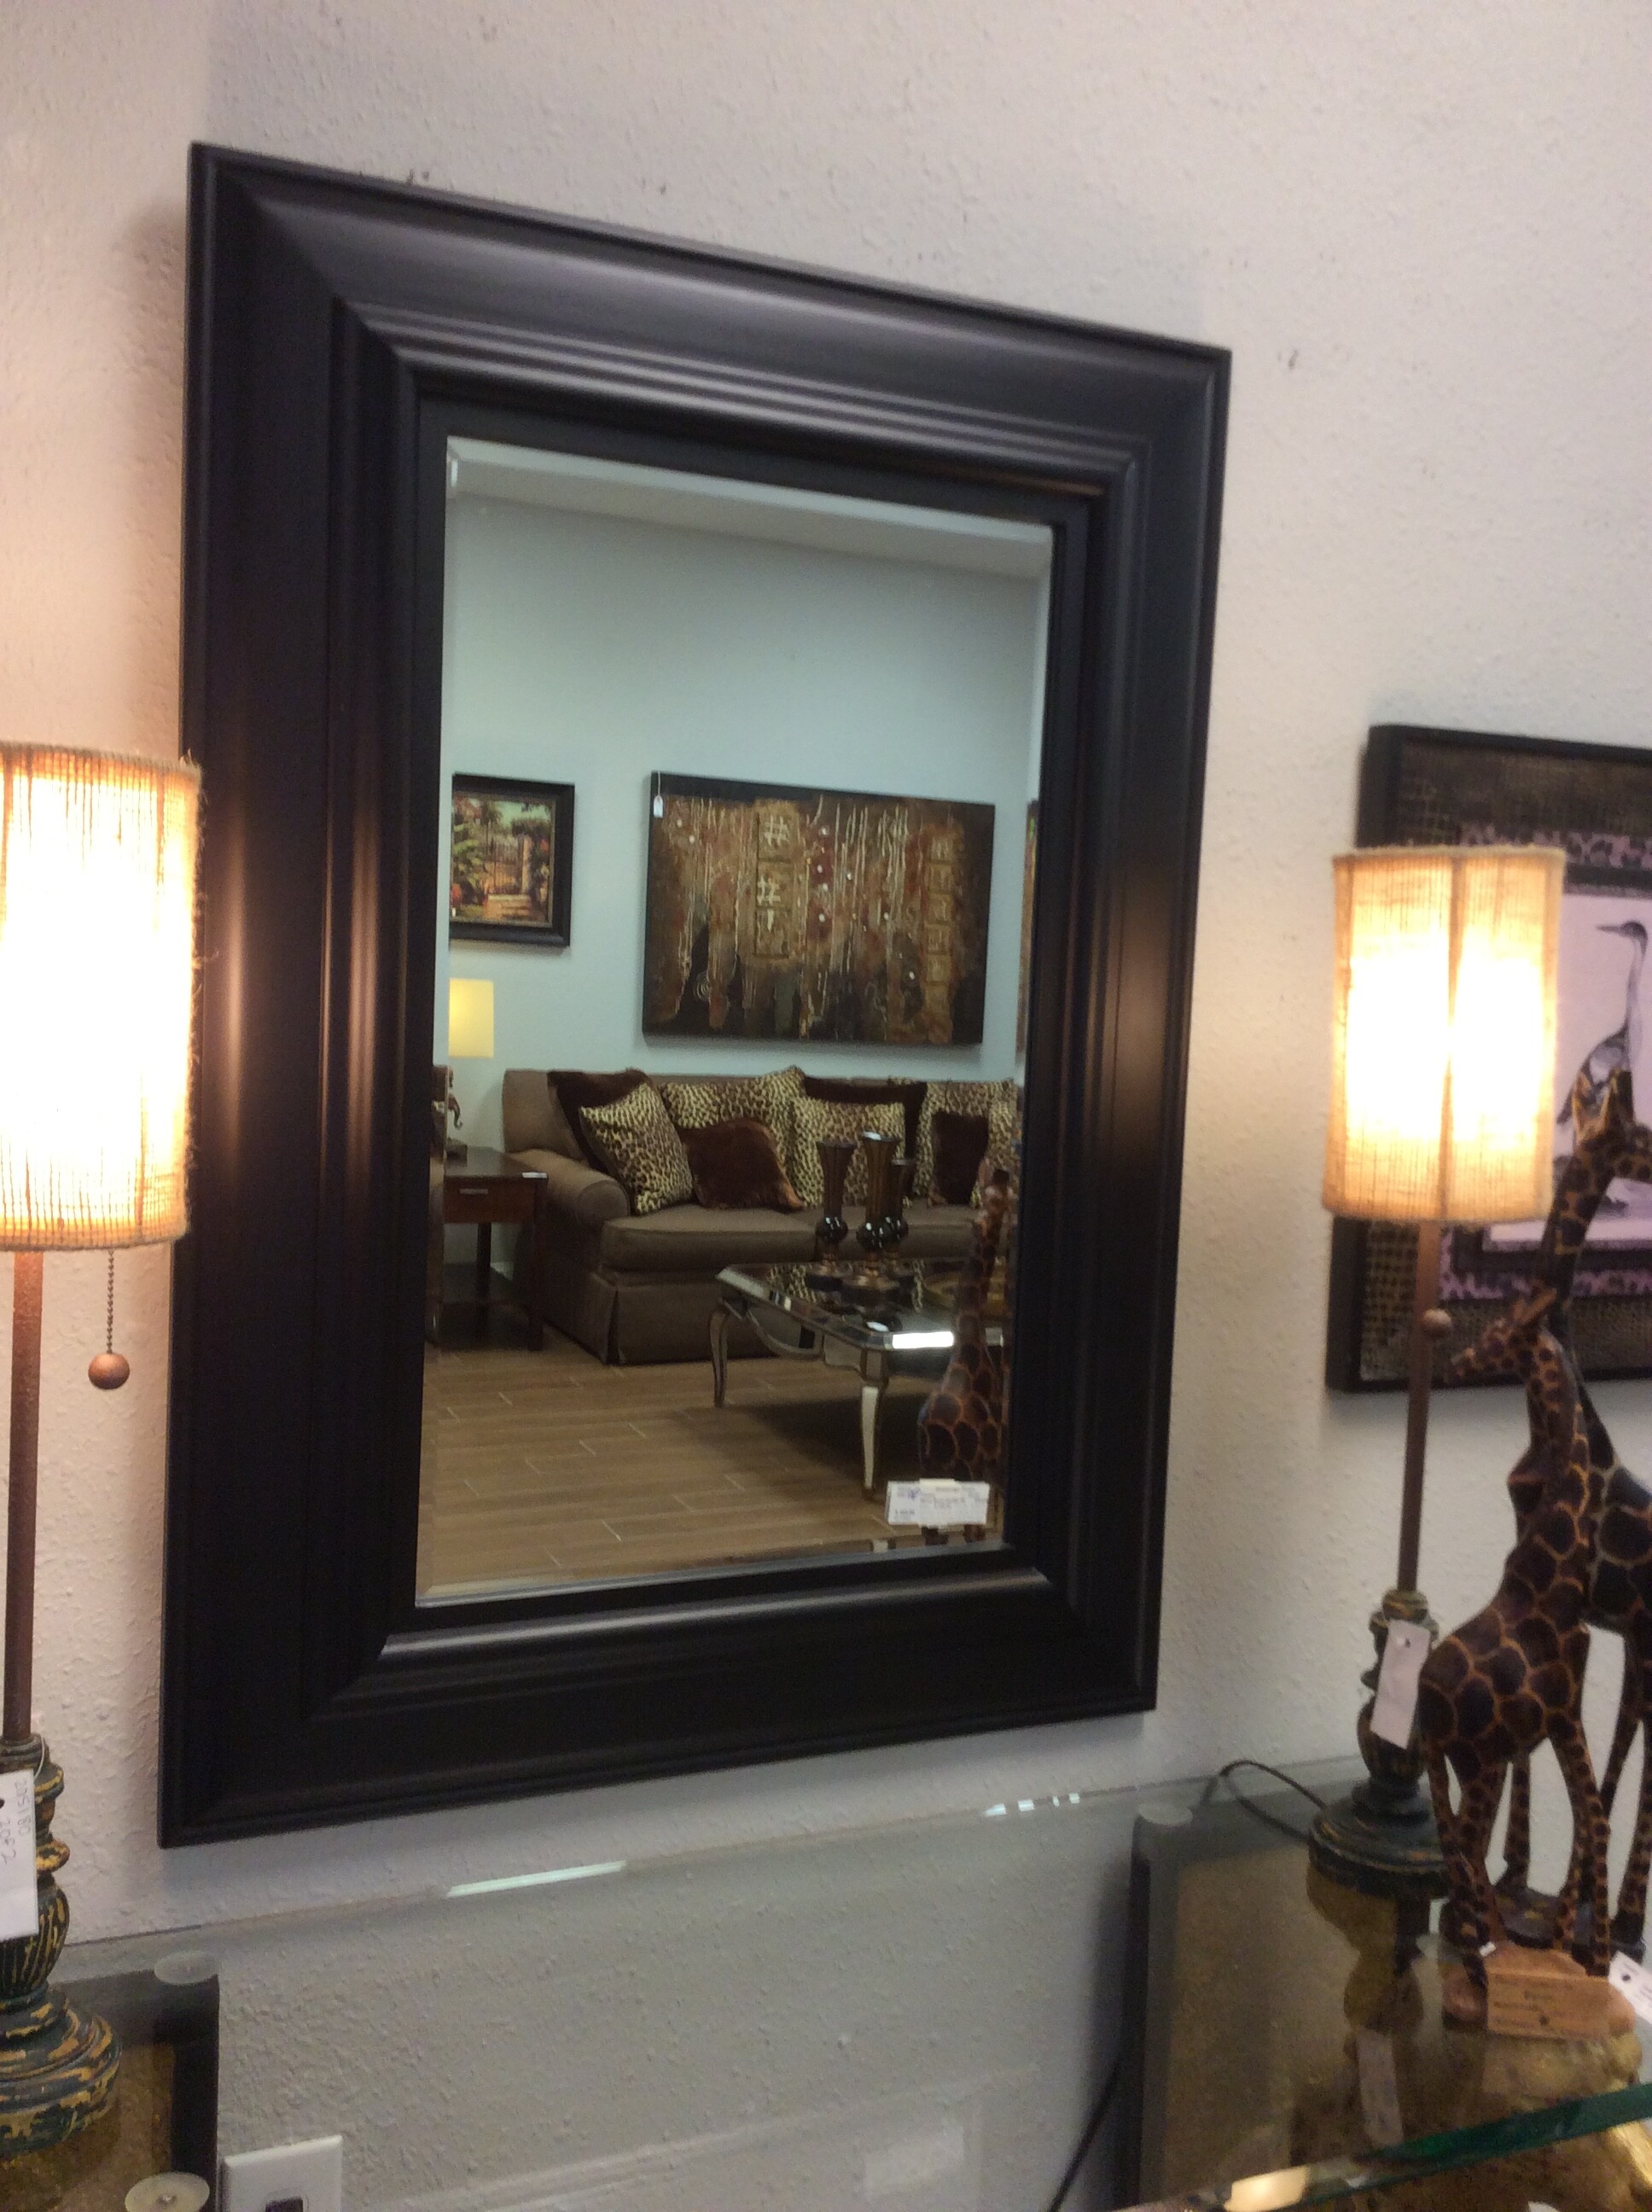 This is a Pottery Barn, Black and Beveled Glass Mirror.